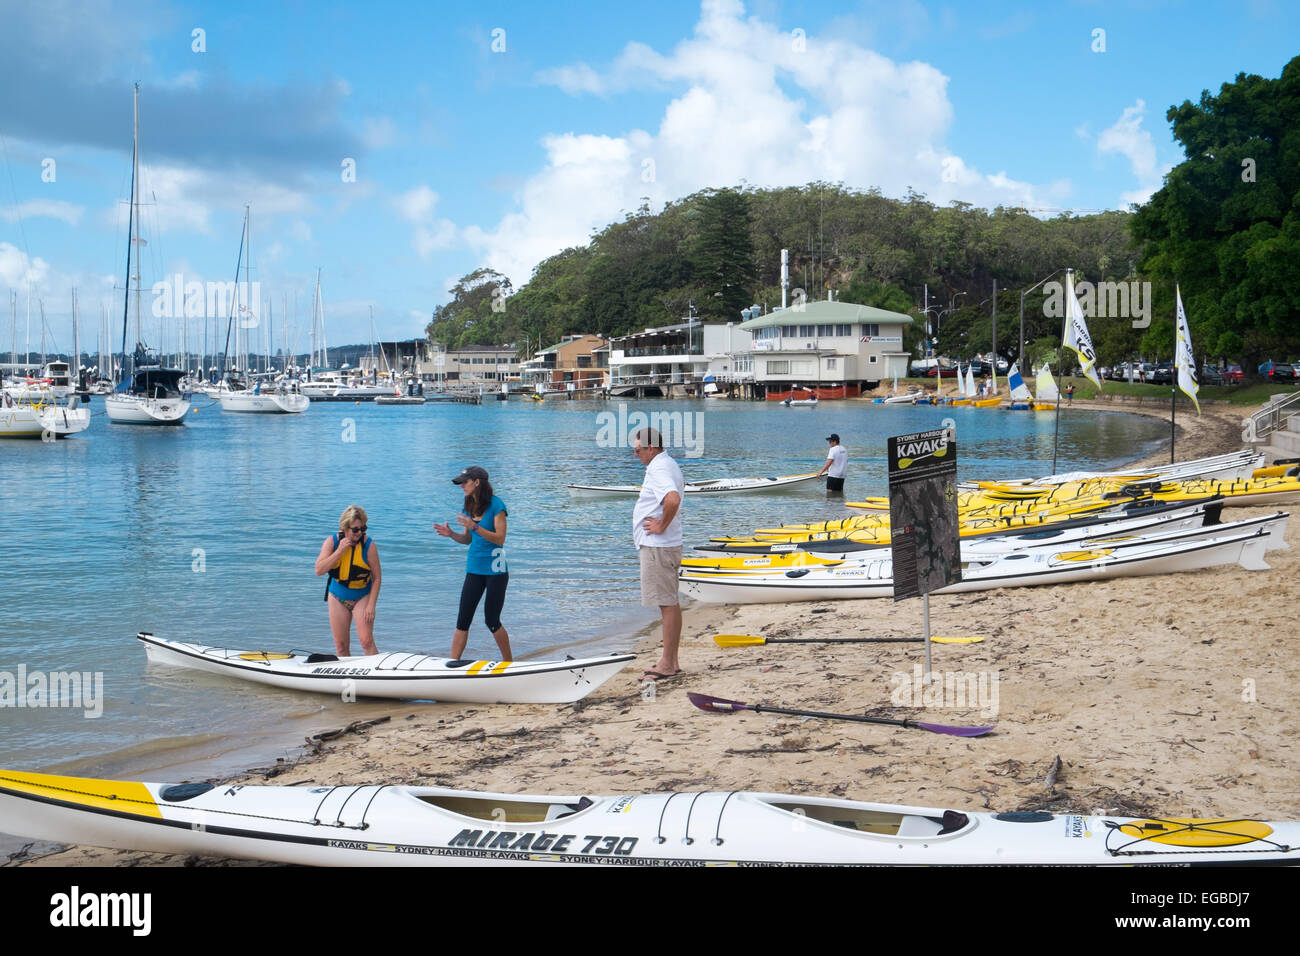 sydney kayak club located at the Spit on middle harbour,Sydney where boats can be bought or hired,australia Stock Photo